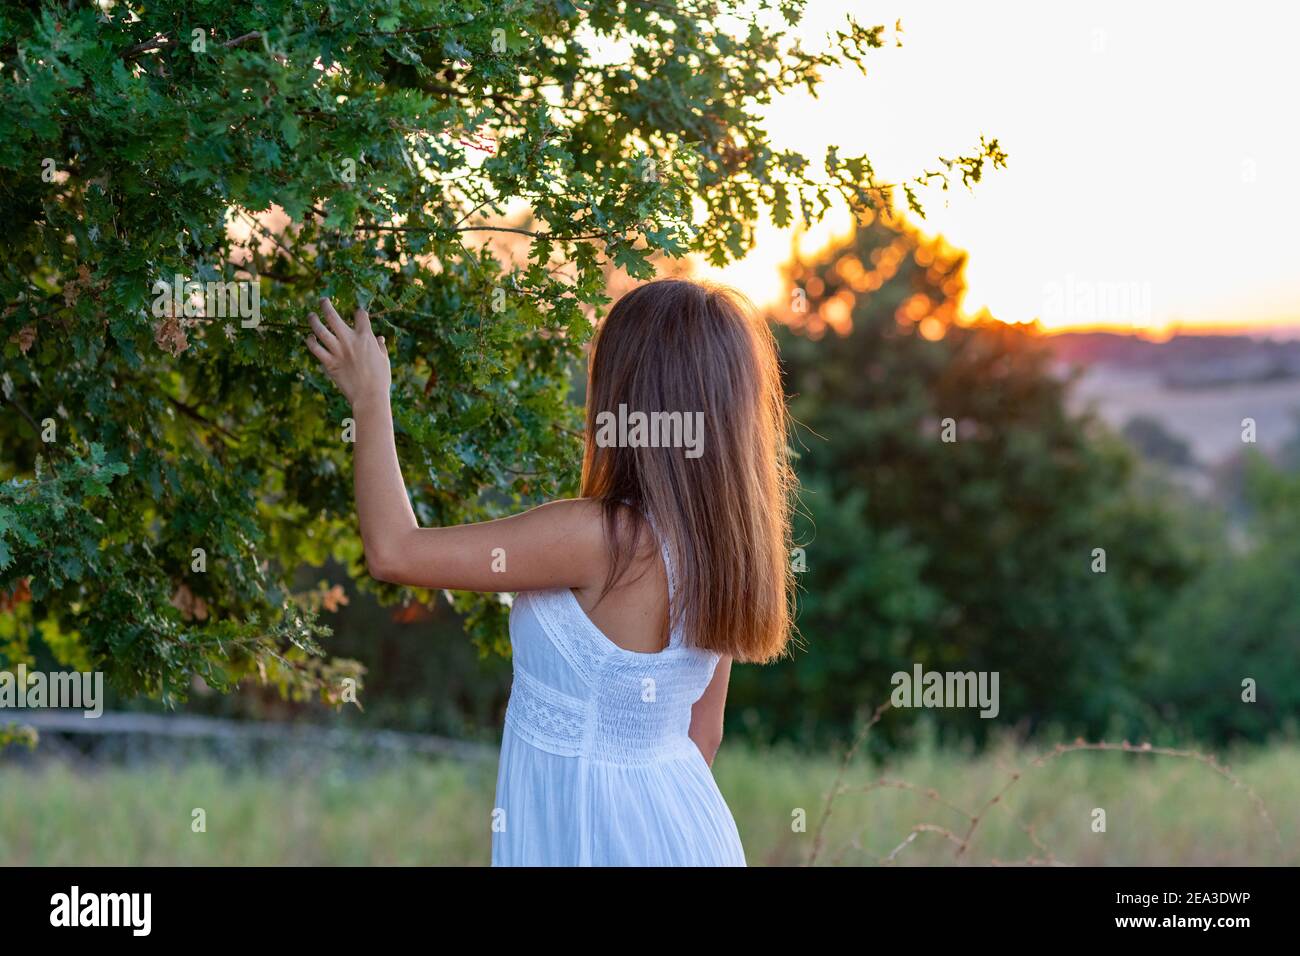 Profile of a young girl with long blond hair dressed in white with her head turned towards the sunset as she touches the leaves of the magic tree Stock Photo